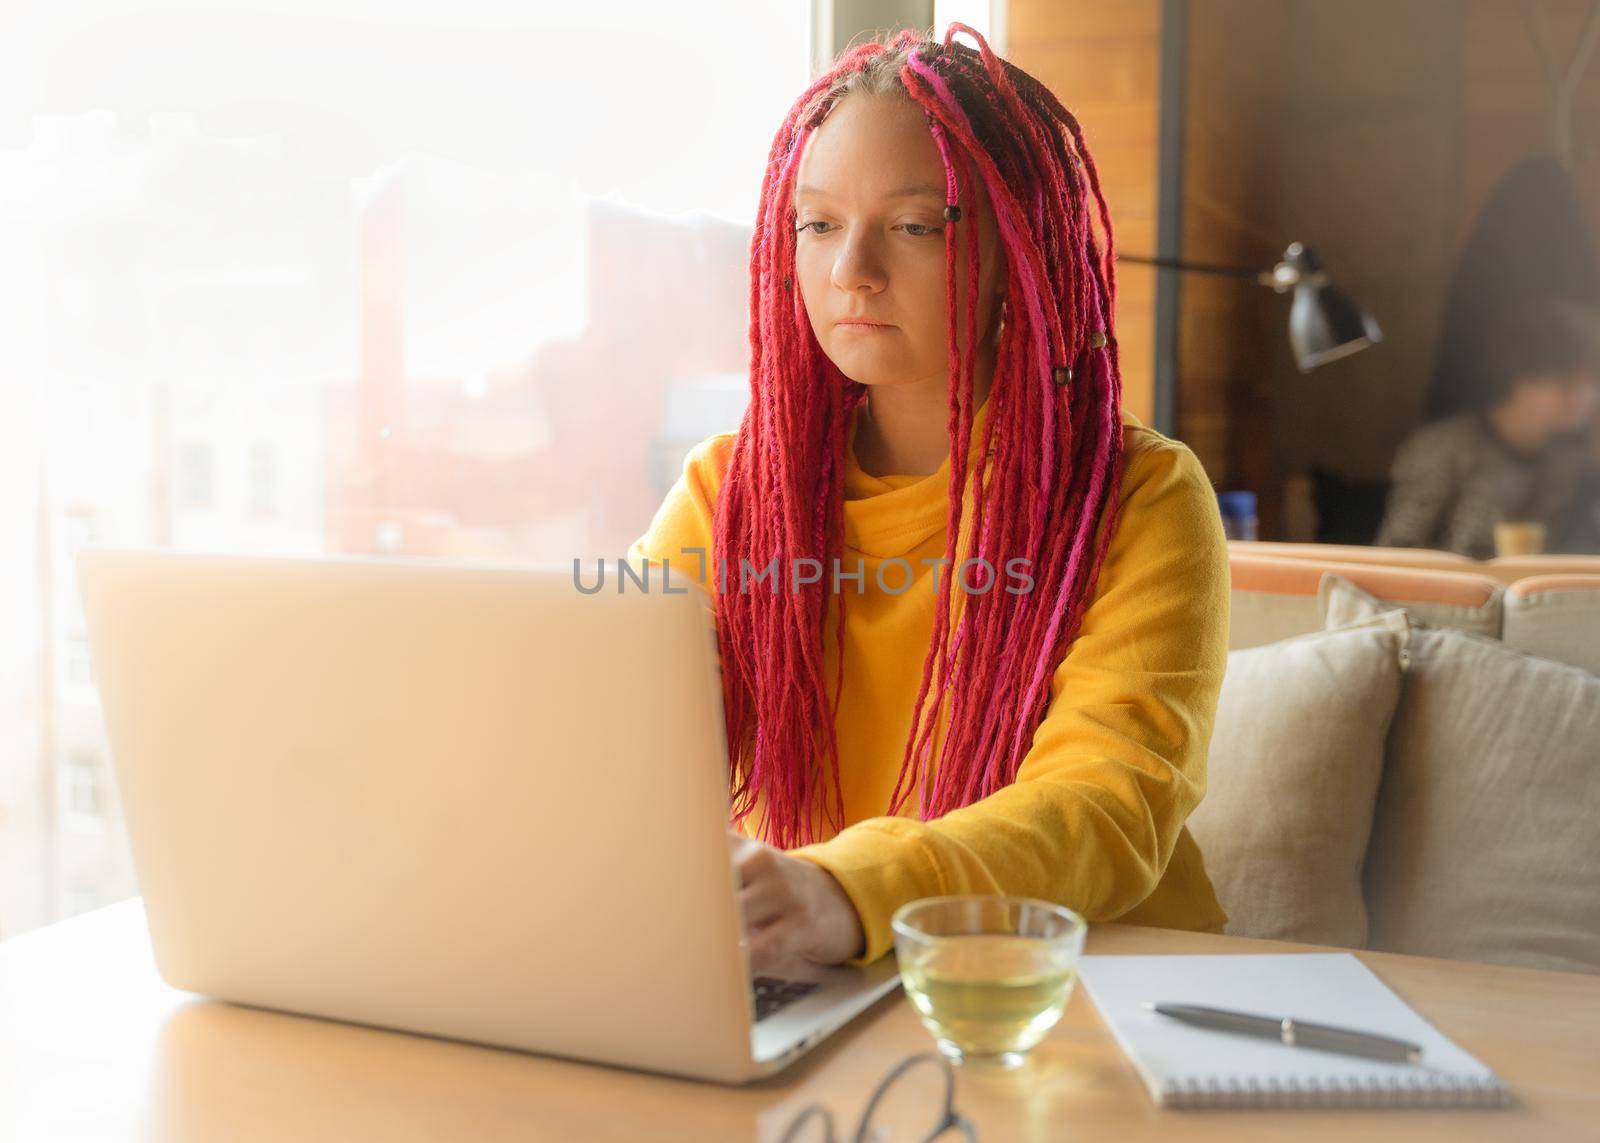 Digital nomad concept. Girl freelancer remotely working on a laptop in a cafe, coworking. Woman with long pink dreadlocks in an informal setting, in casual comfortable clothes sitting at the table.